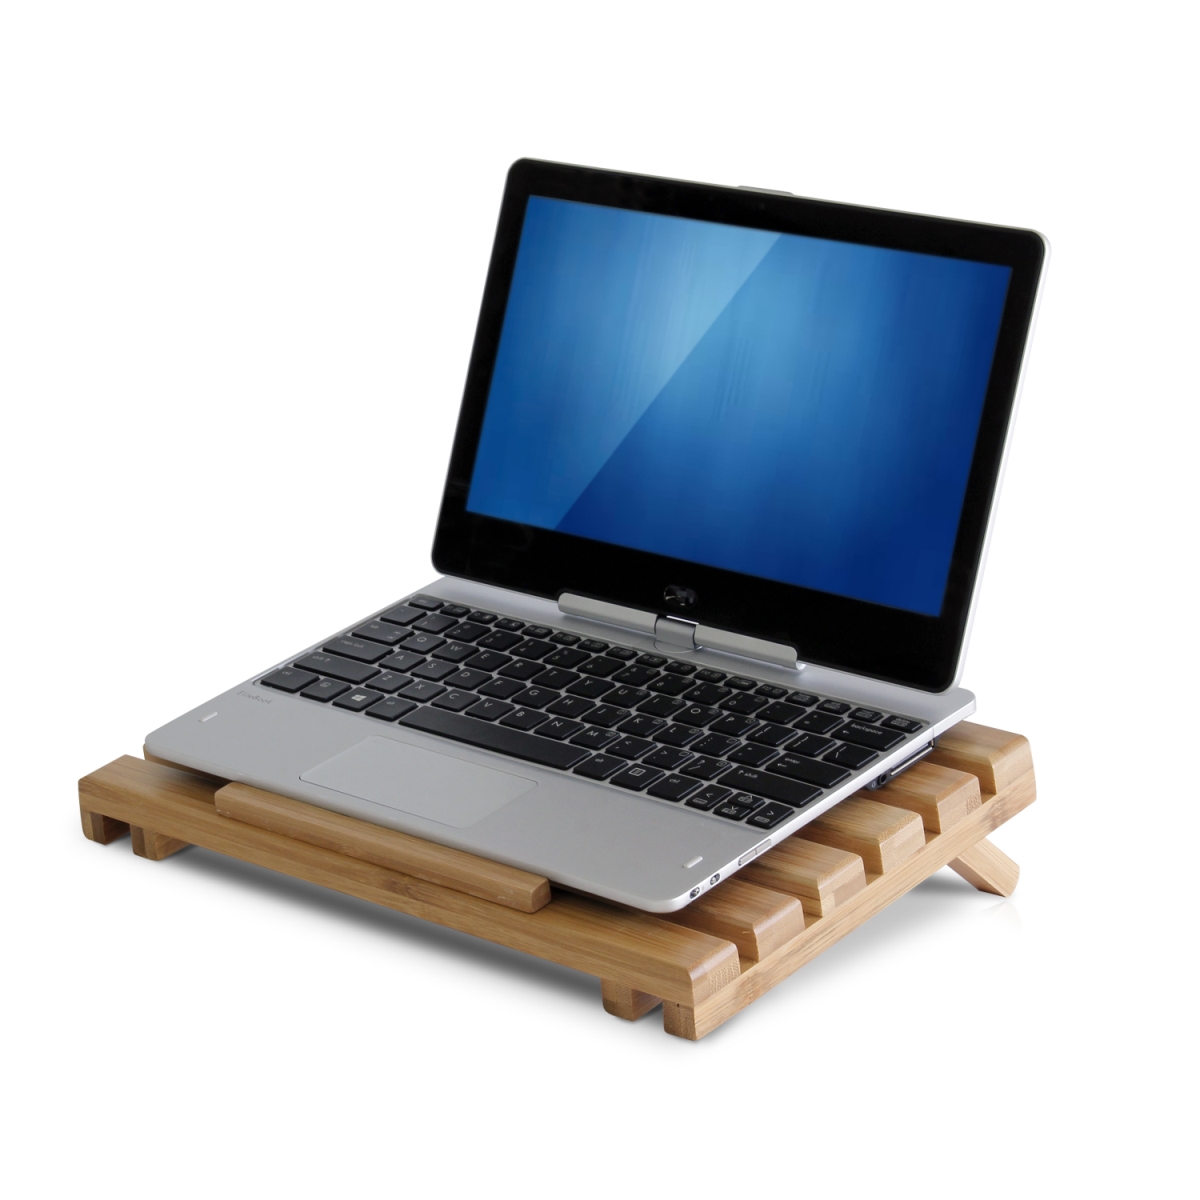 Fncj-33027 Bamboo Notebook Cooling Desk Tray, Natural